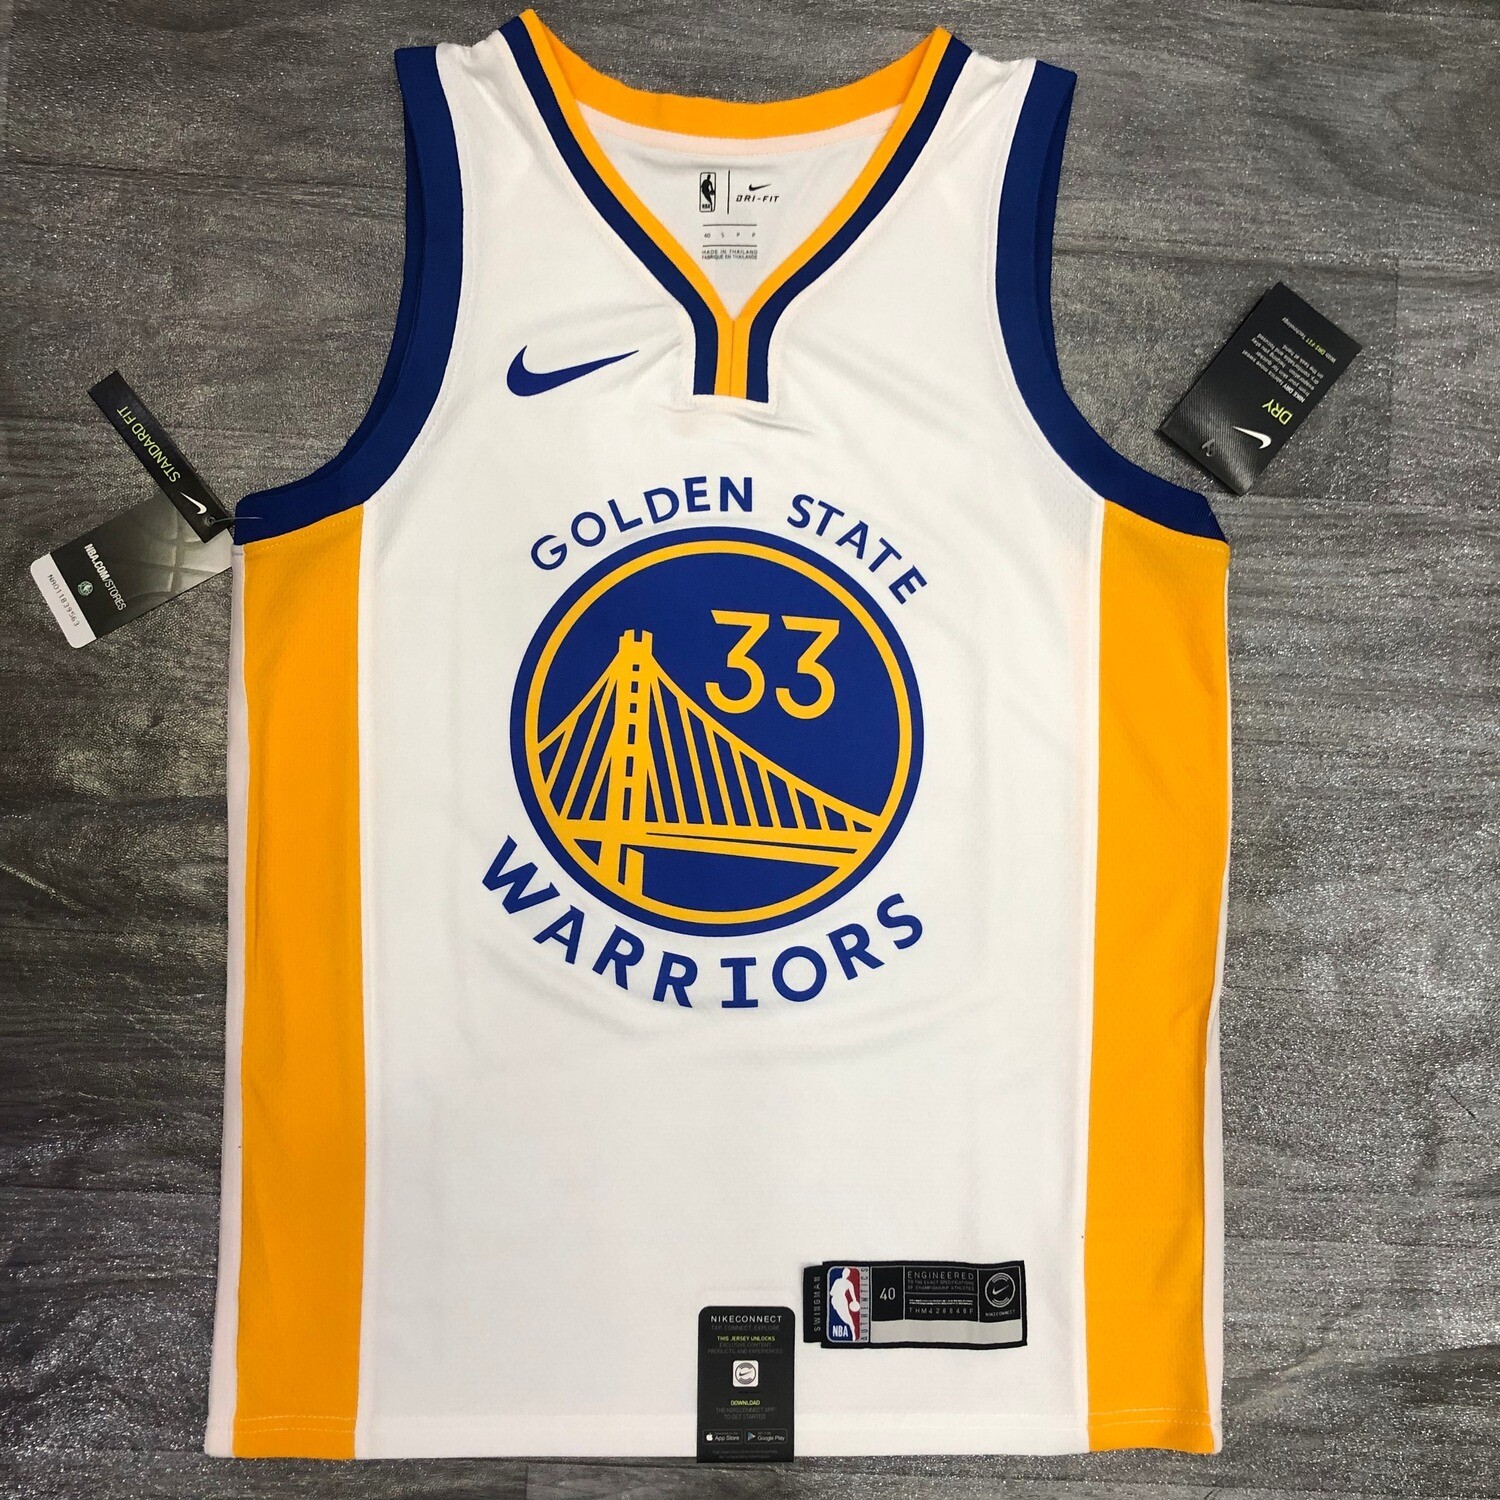 GOLDEN STATE WARRIORS Maglia Jersey Camisetas WARRIORS scelta fra le foto Choice from Photo 8 modelli tra cui scegliere 8 models to choice